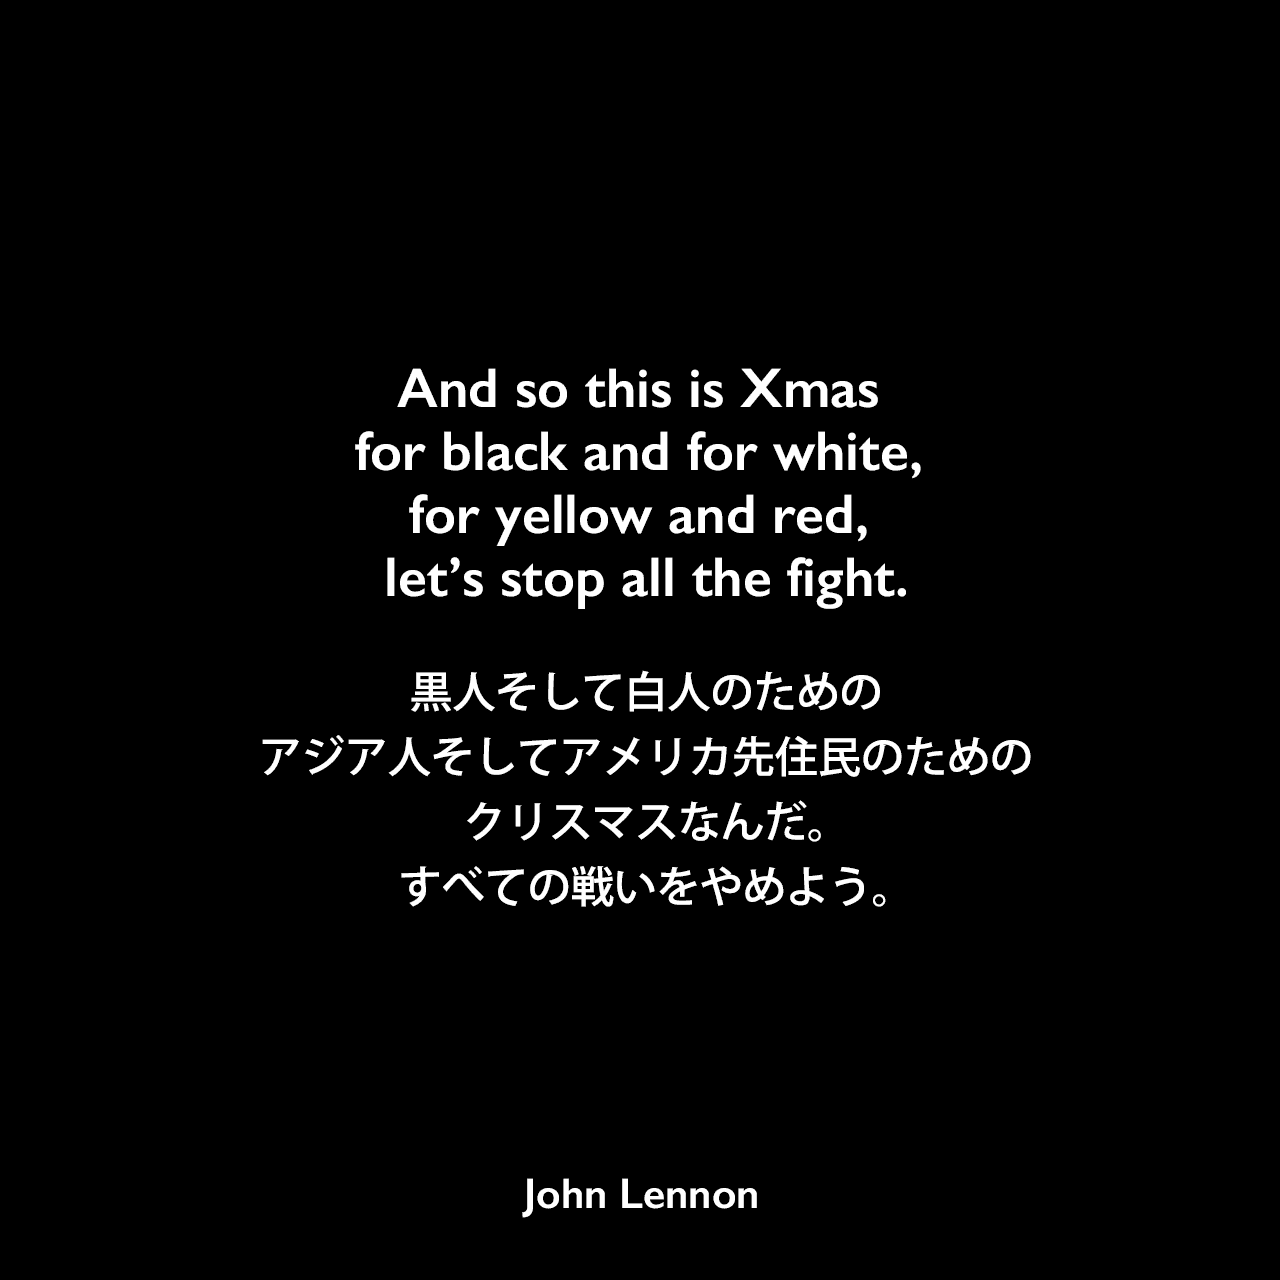 And so this is Xmas for black and for white, for yellow and red, let’s stop all the fight.黒人そして白人のための、アジア人そしてアメリカ先住民のためのクリスマスなんだ。すべての戦いをやめよう。- ジョン・レノン、 オノ・ヨーコ作詞・作曲の「ハッピー・クリスマス (戦争は終った)」よりJohn Lennon